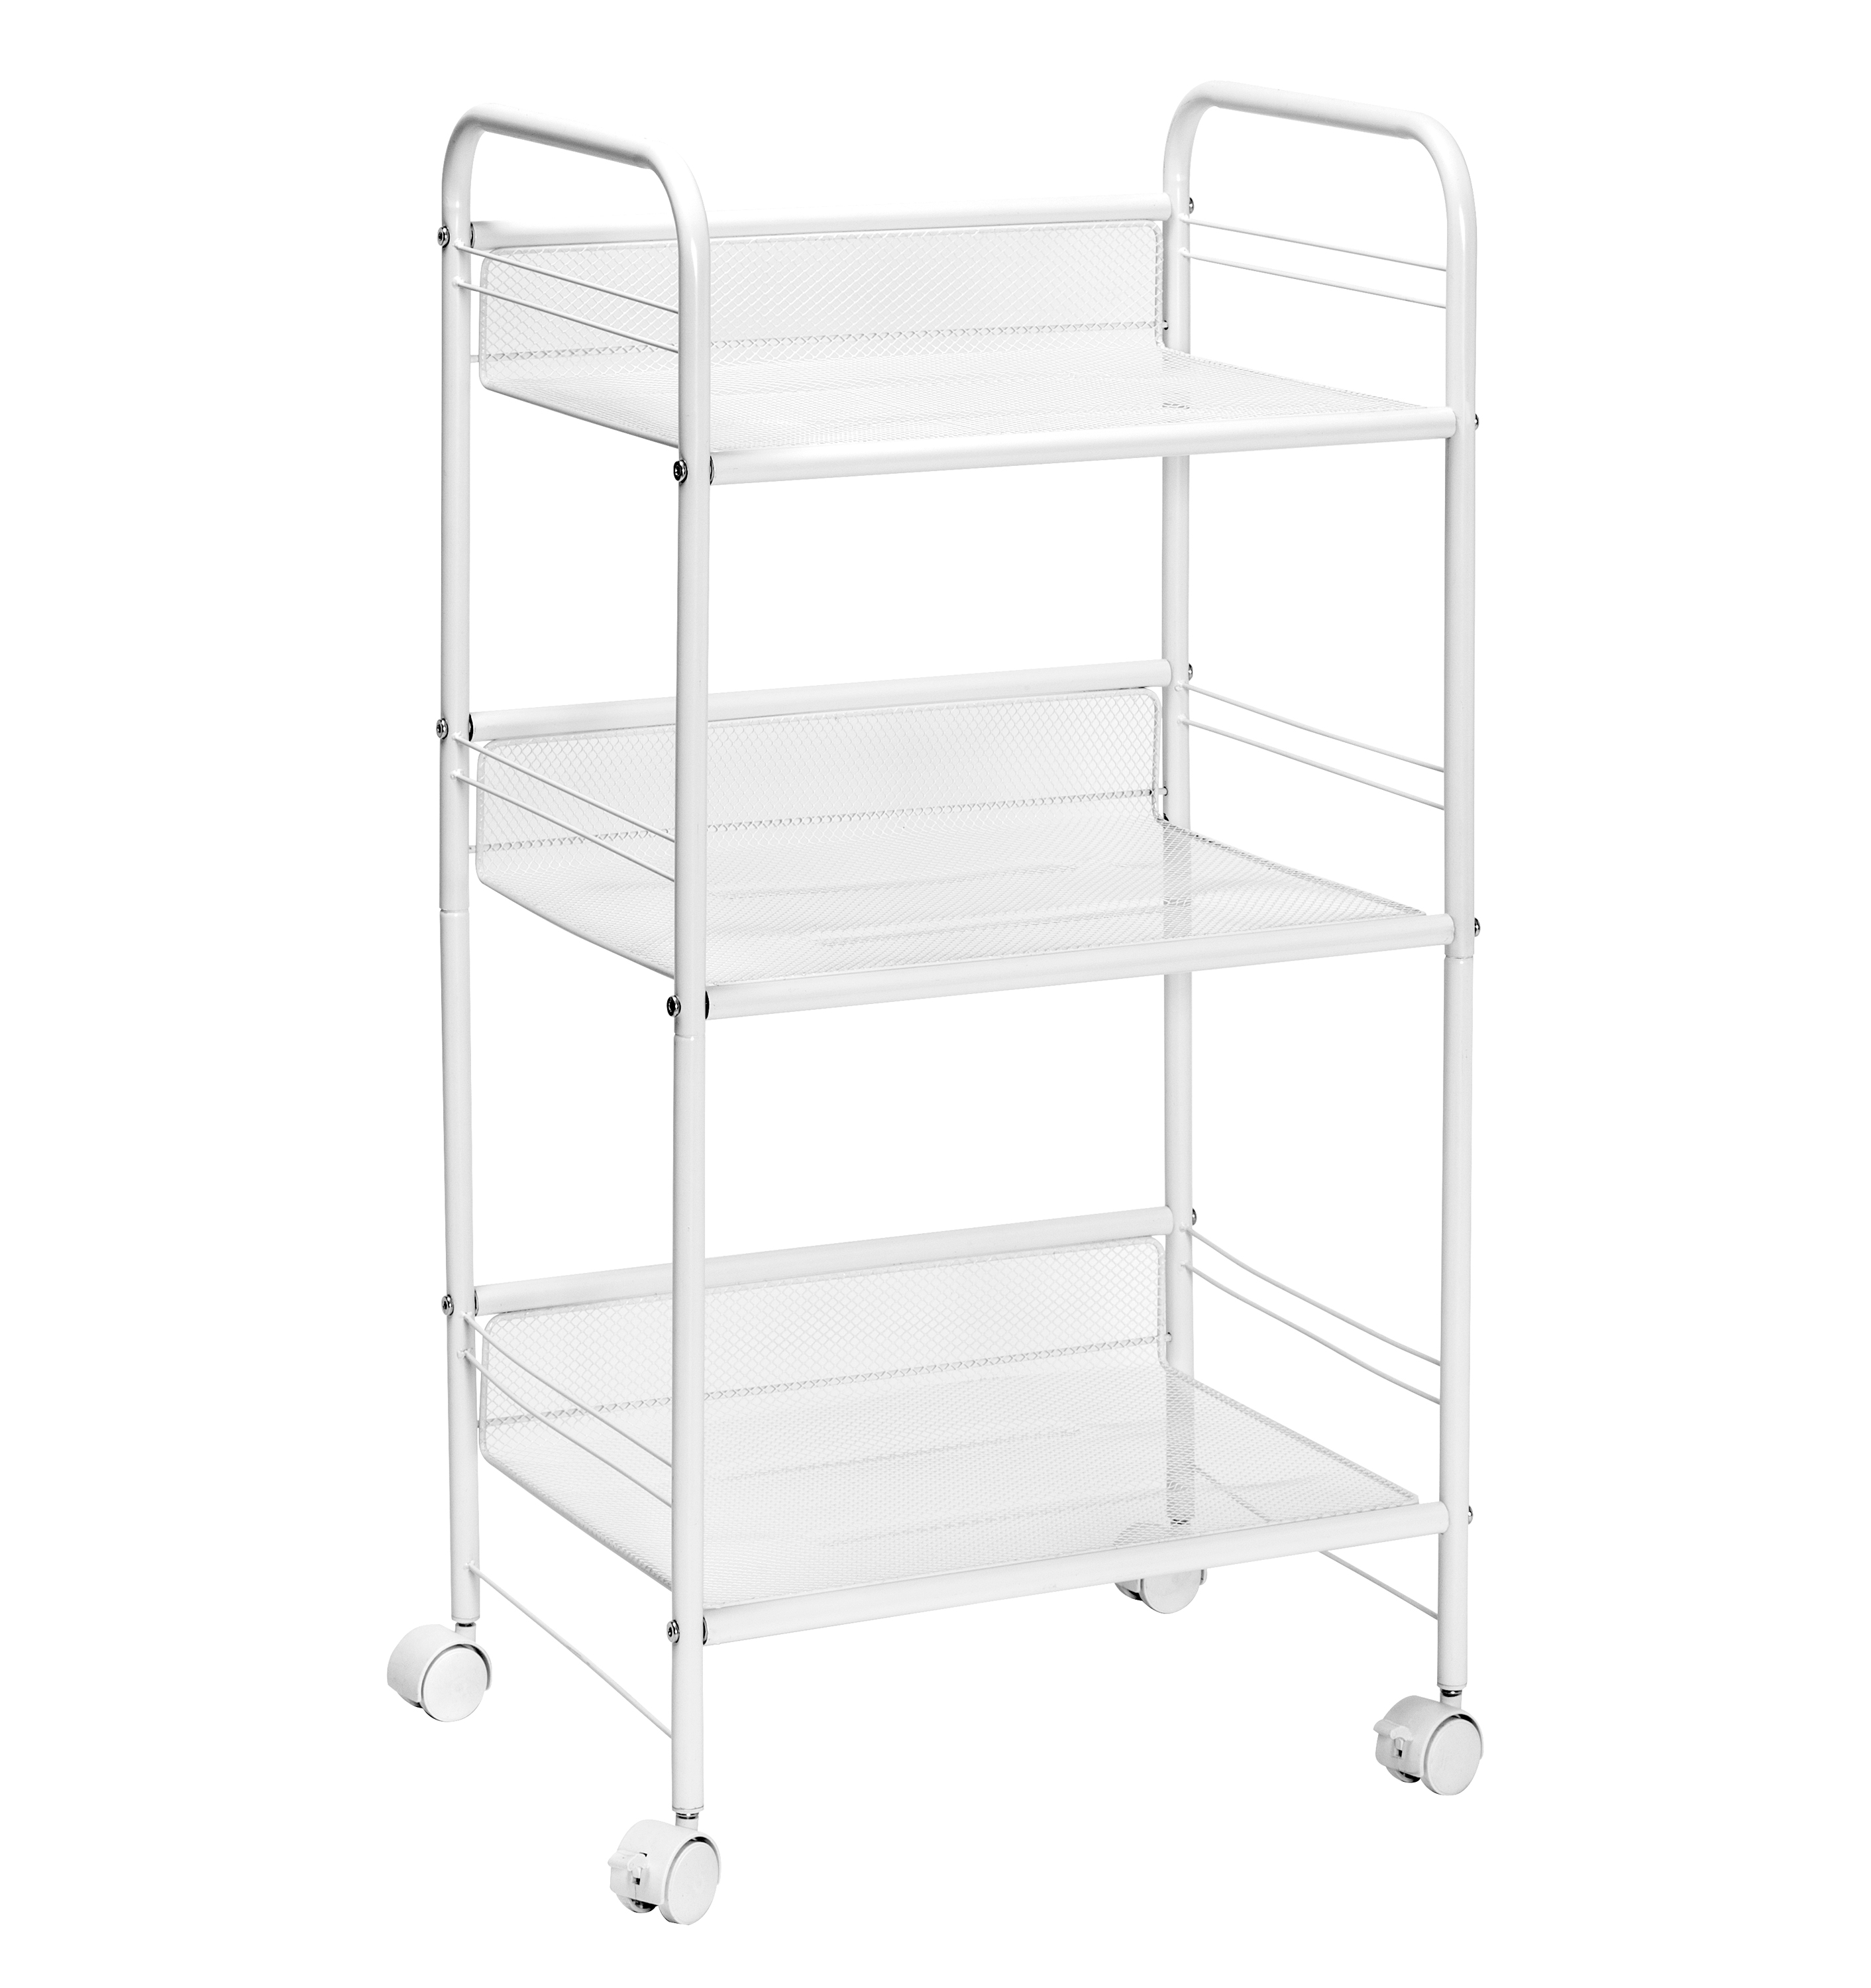 Honey-Can-Do 3-Tier Rolling Steel Wire Storage Cart with Lockable Wheels, White - image 4 of 8